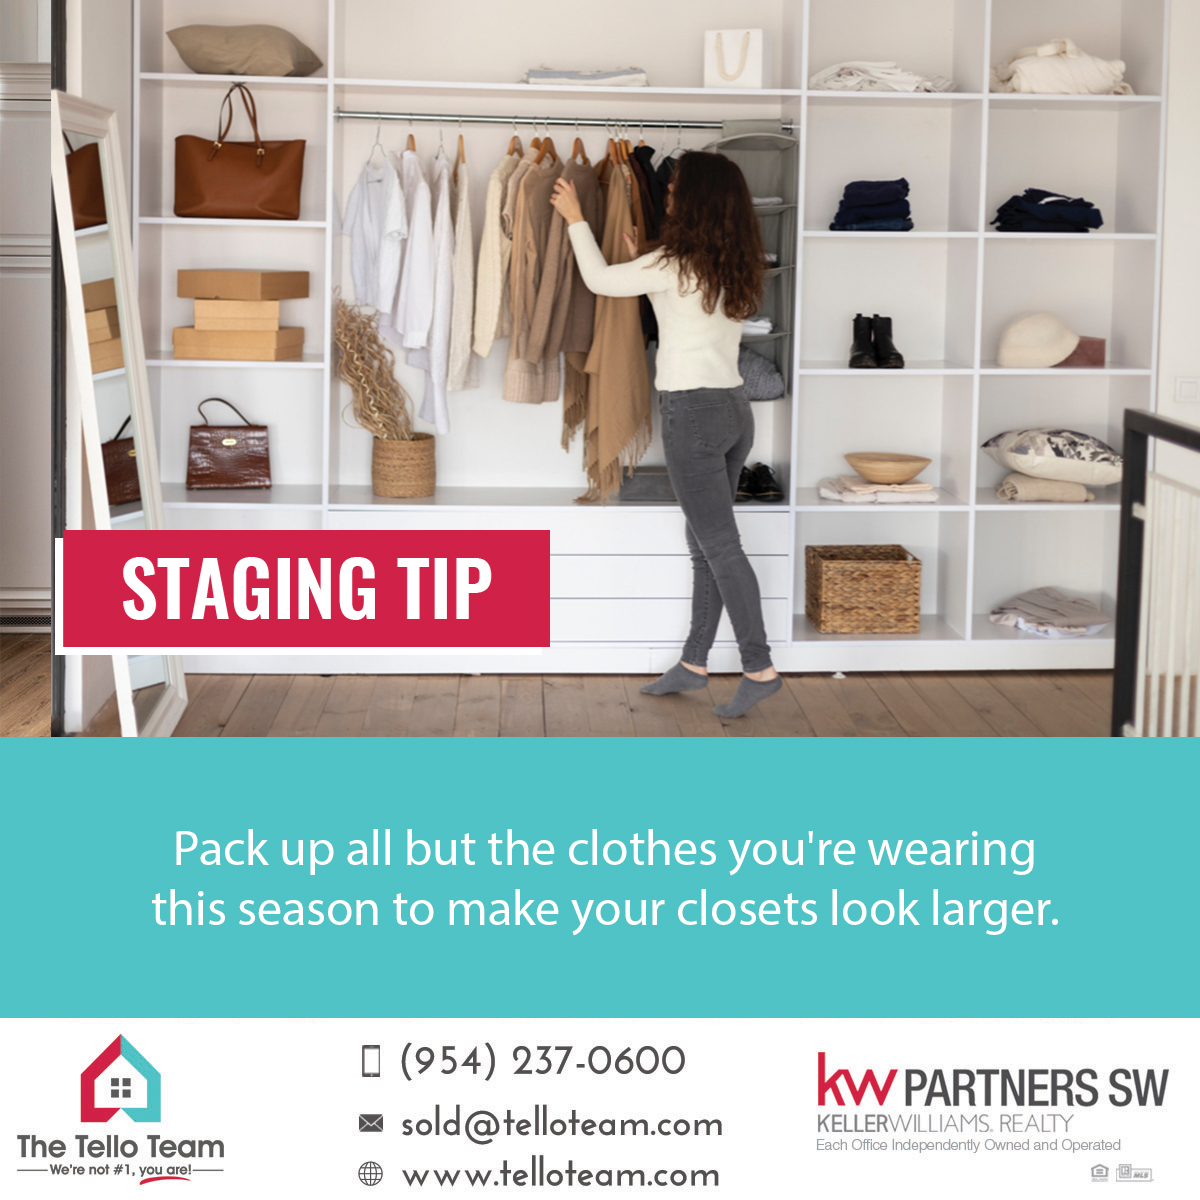 Pack up all but the clothes you're wearing this season to make your closets look larger.

#stagingtip #homestaging #miamihomes #thetelloteam #realtor #realestatebroker